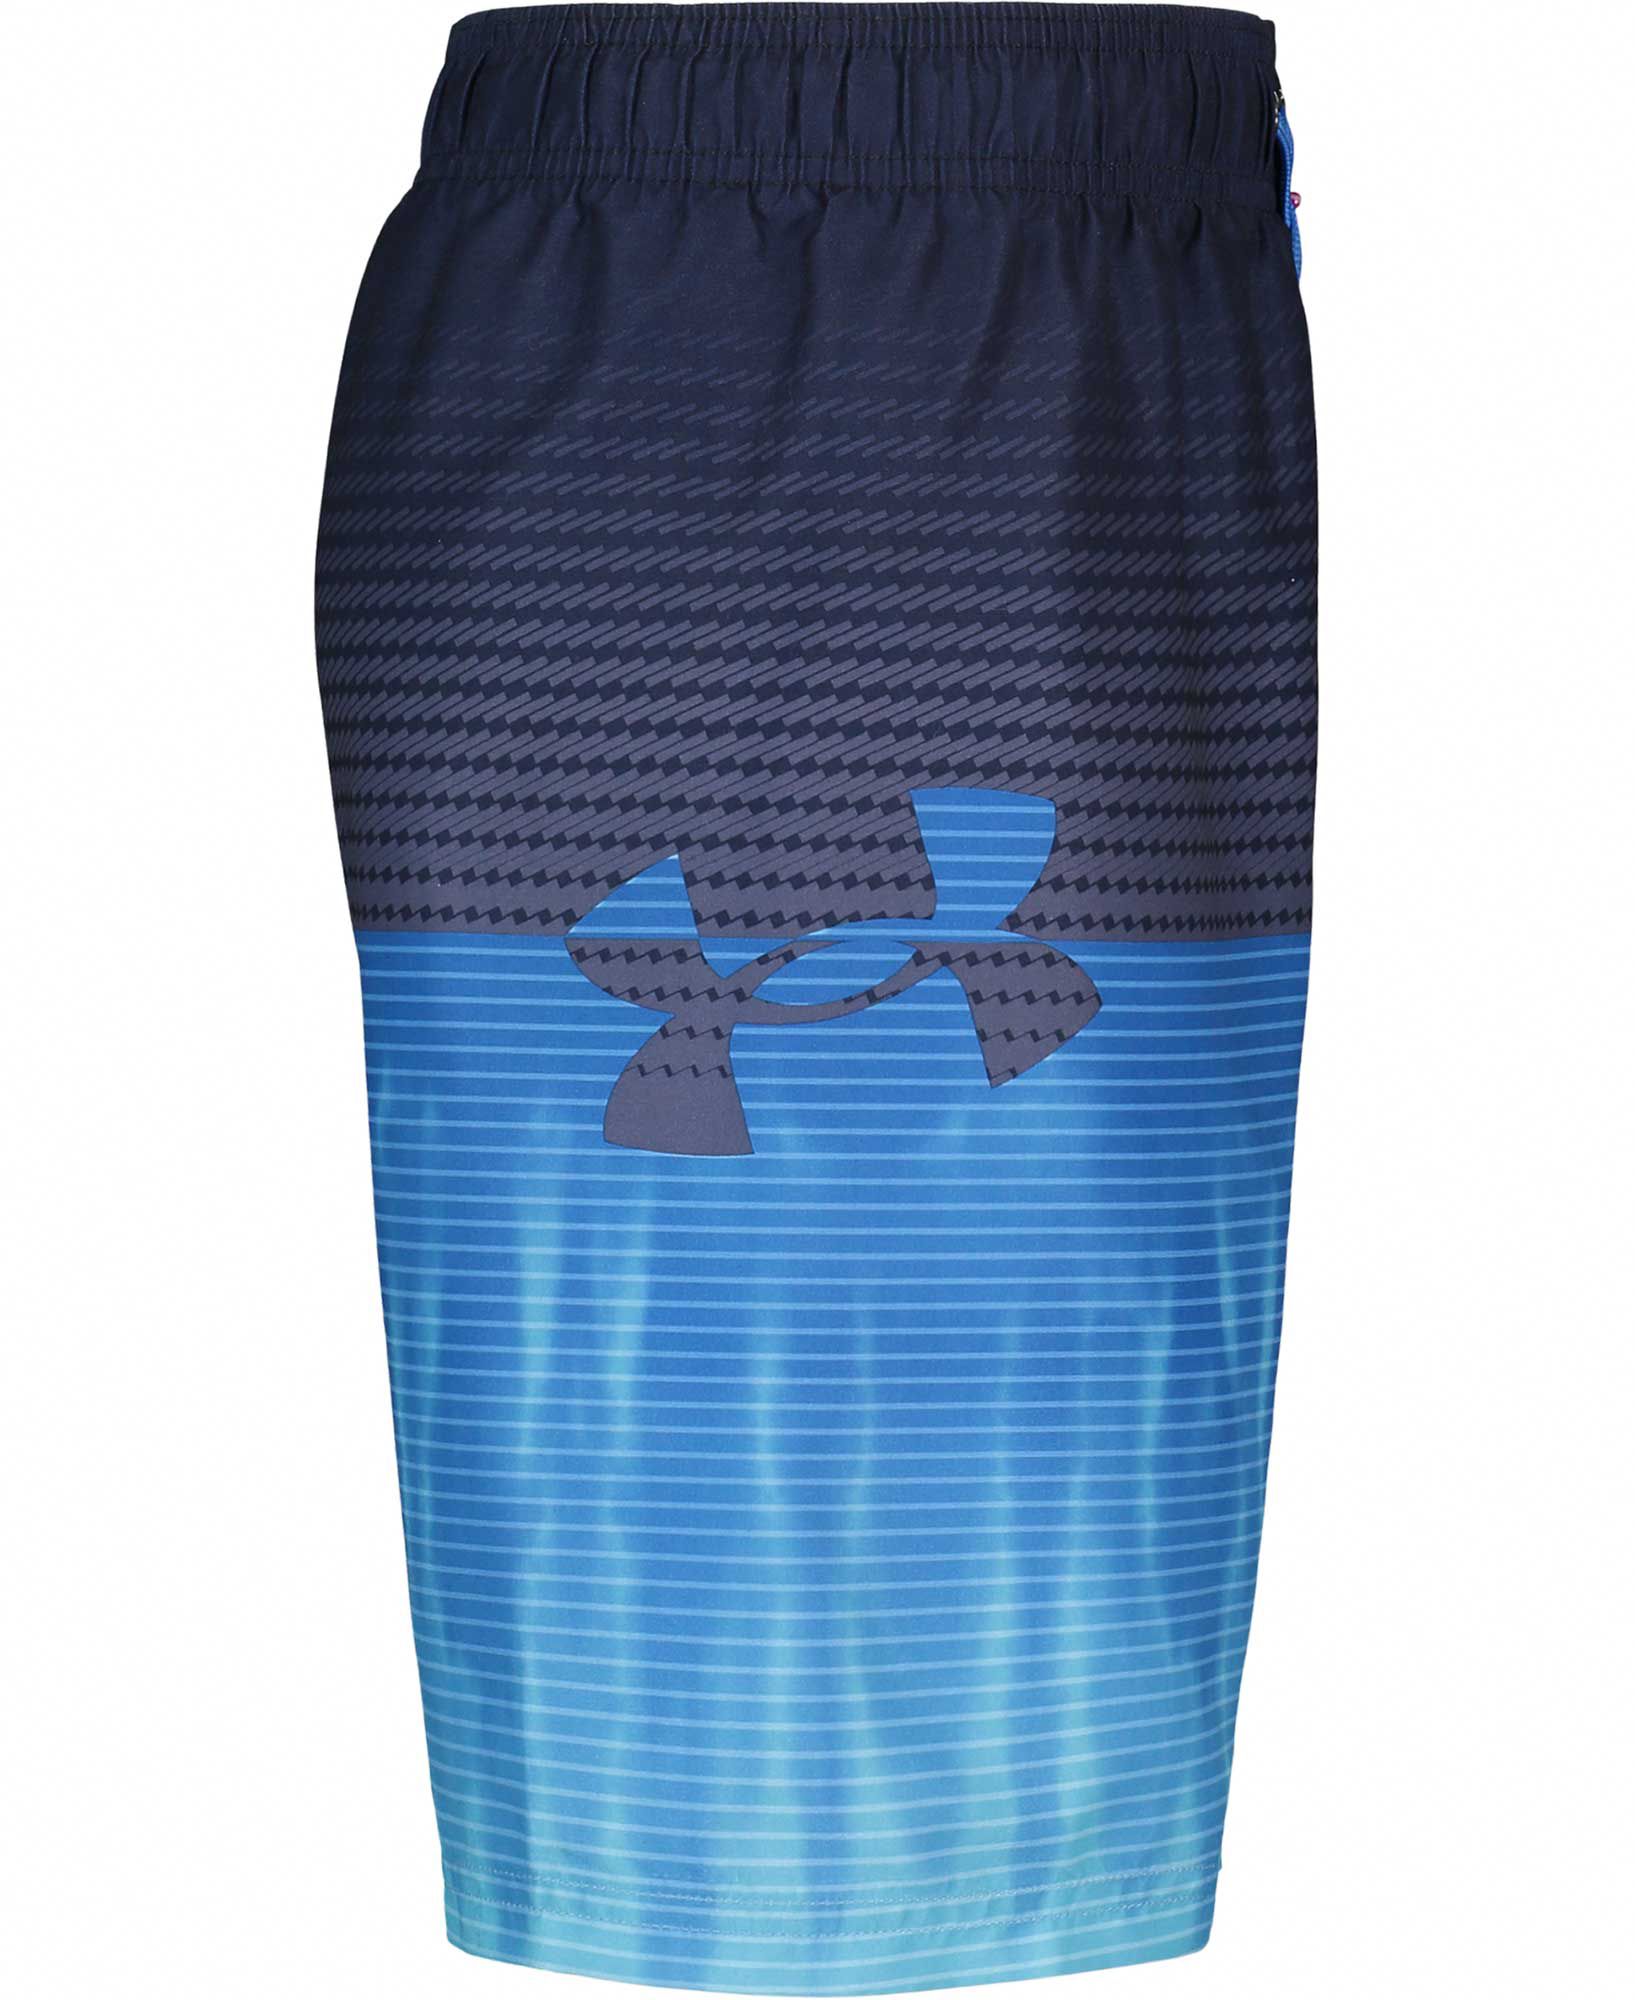 Under Armour Boys' Velocity Volley Shorts